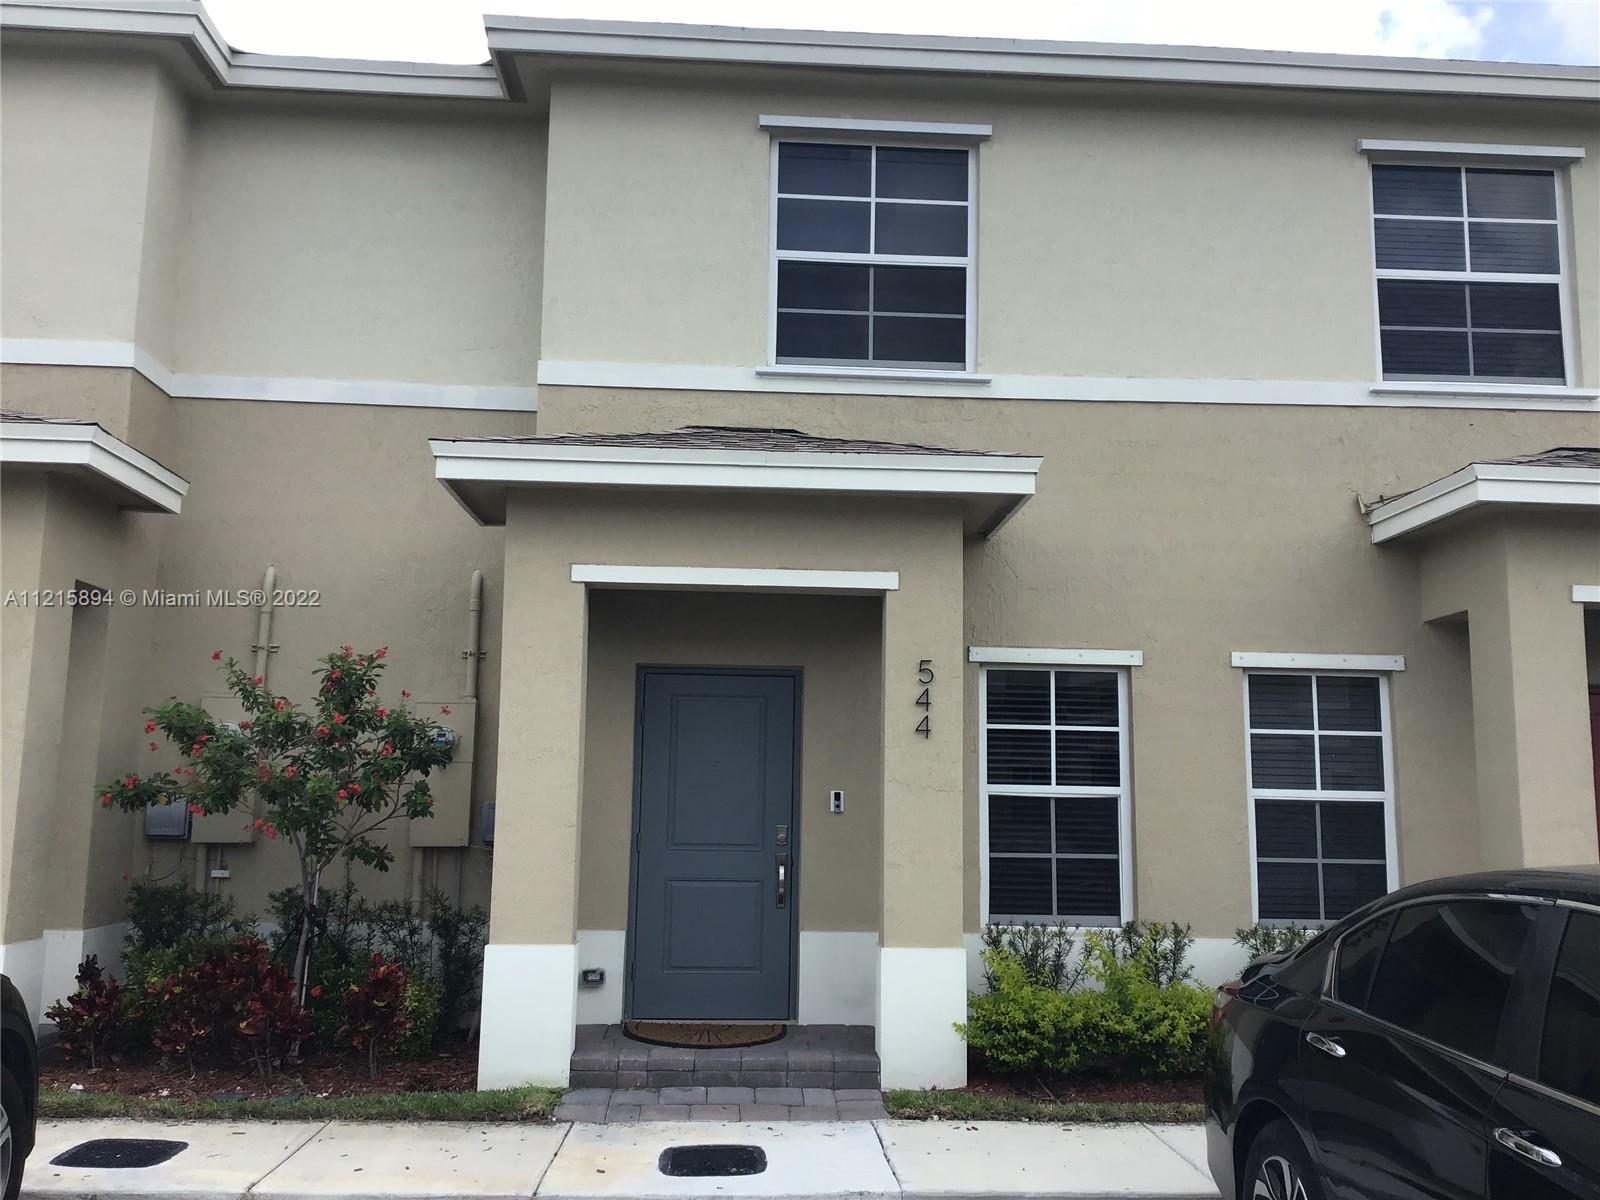 Beautiful townhouse 2 bedrooms  each one with bathroom inside and  a half bathroom in the first floor for visitors. Almost New.  Great location. Community pool available and much more. 2 parking #509 #508